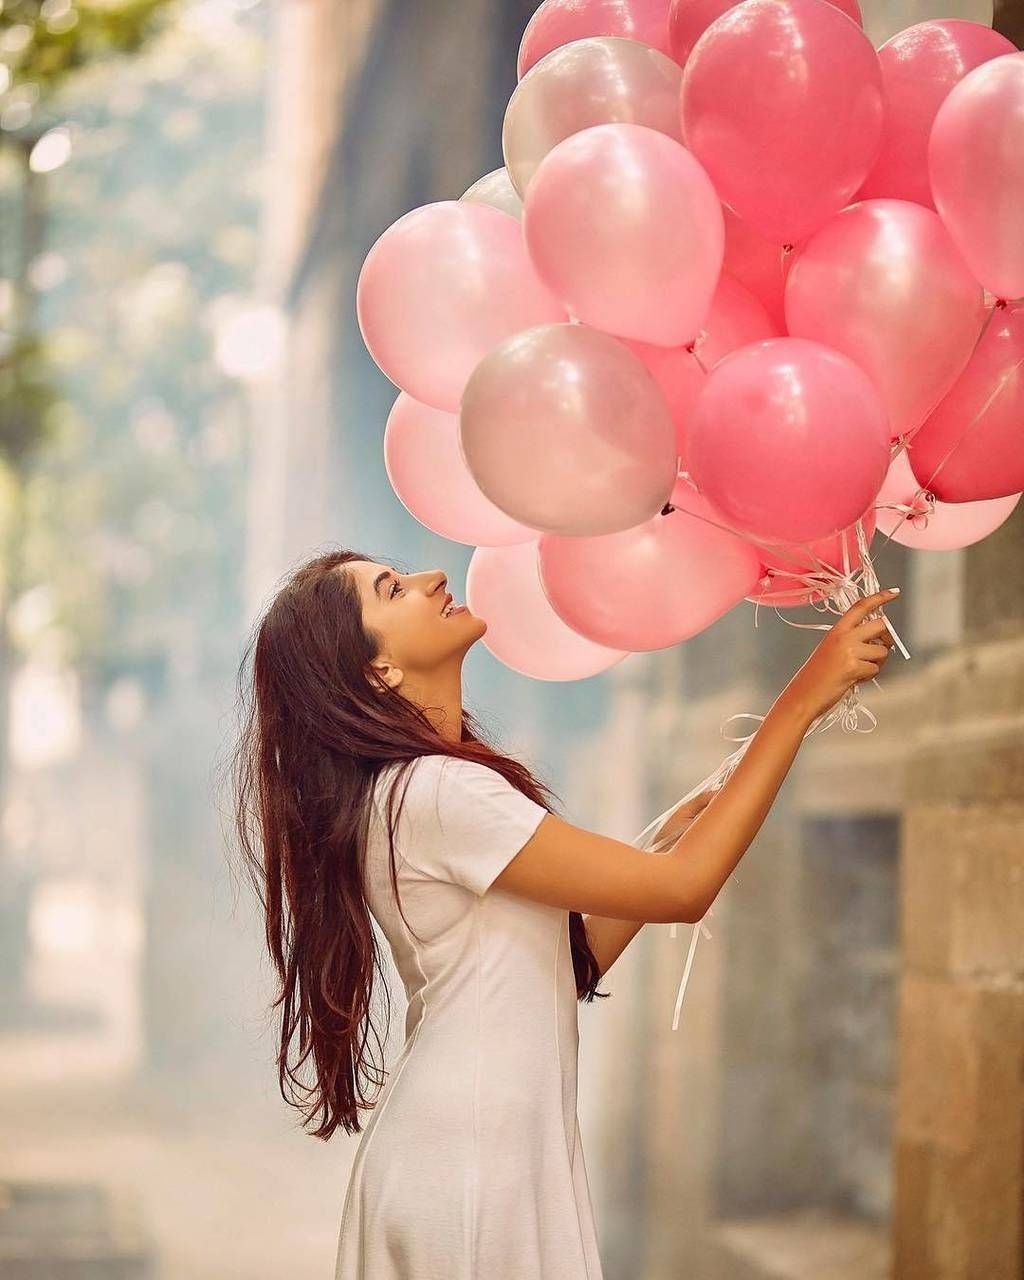 Balloons photography, Girl photography poses, Portrait photography poses